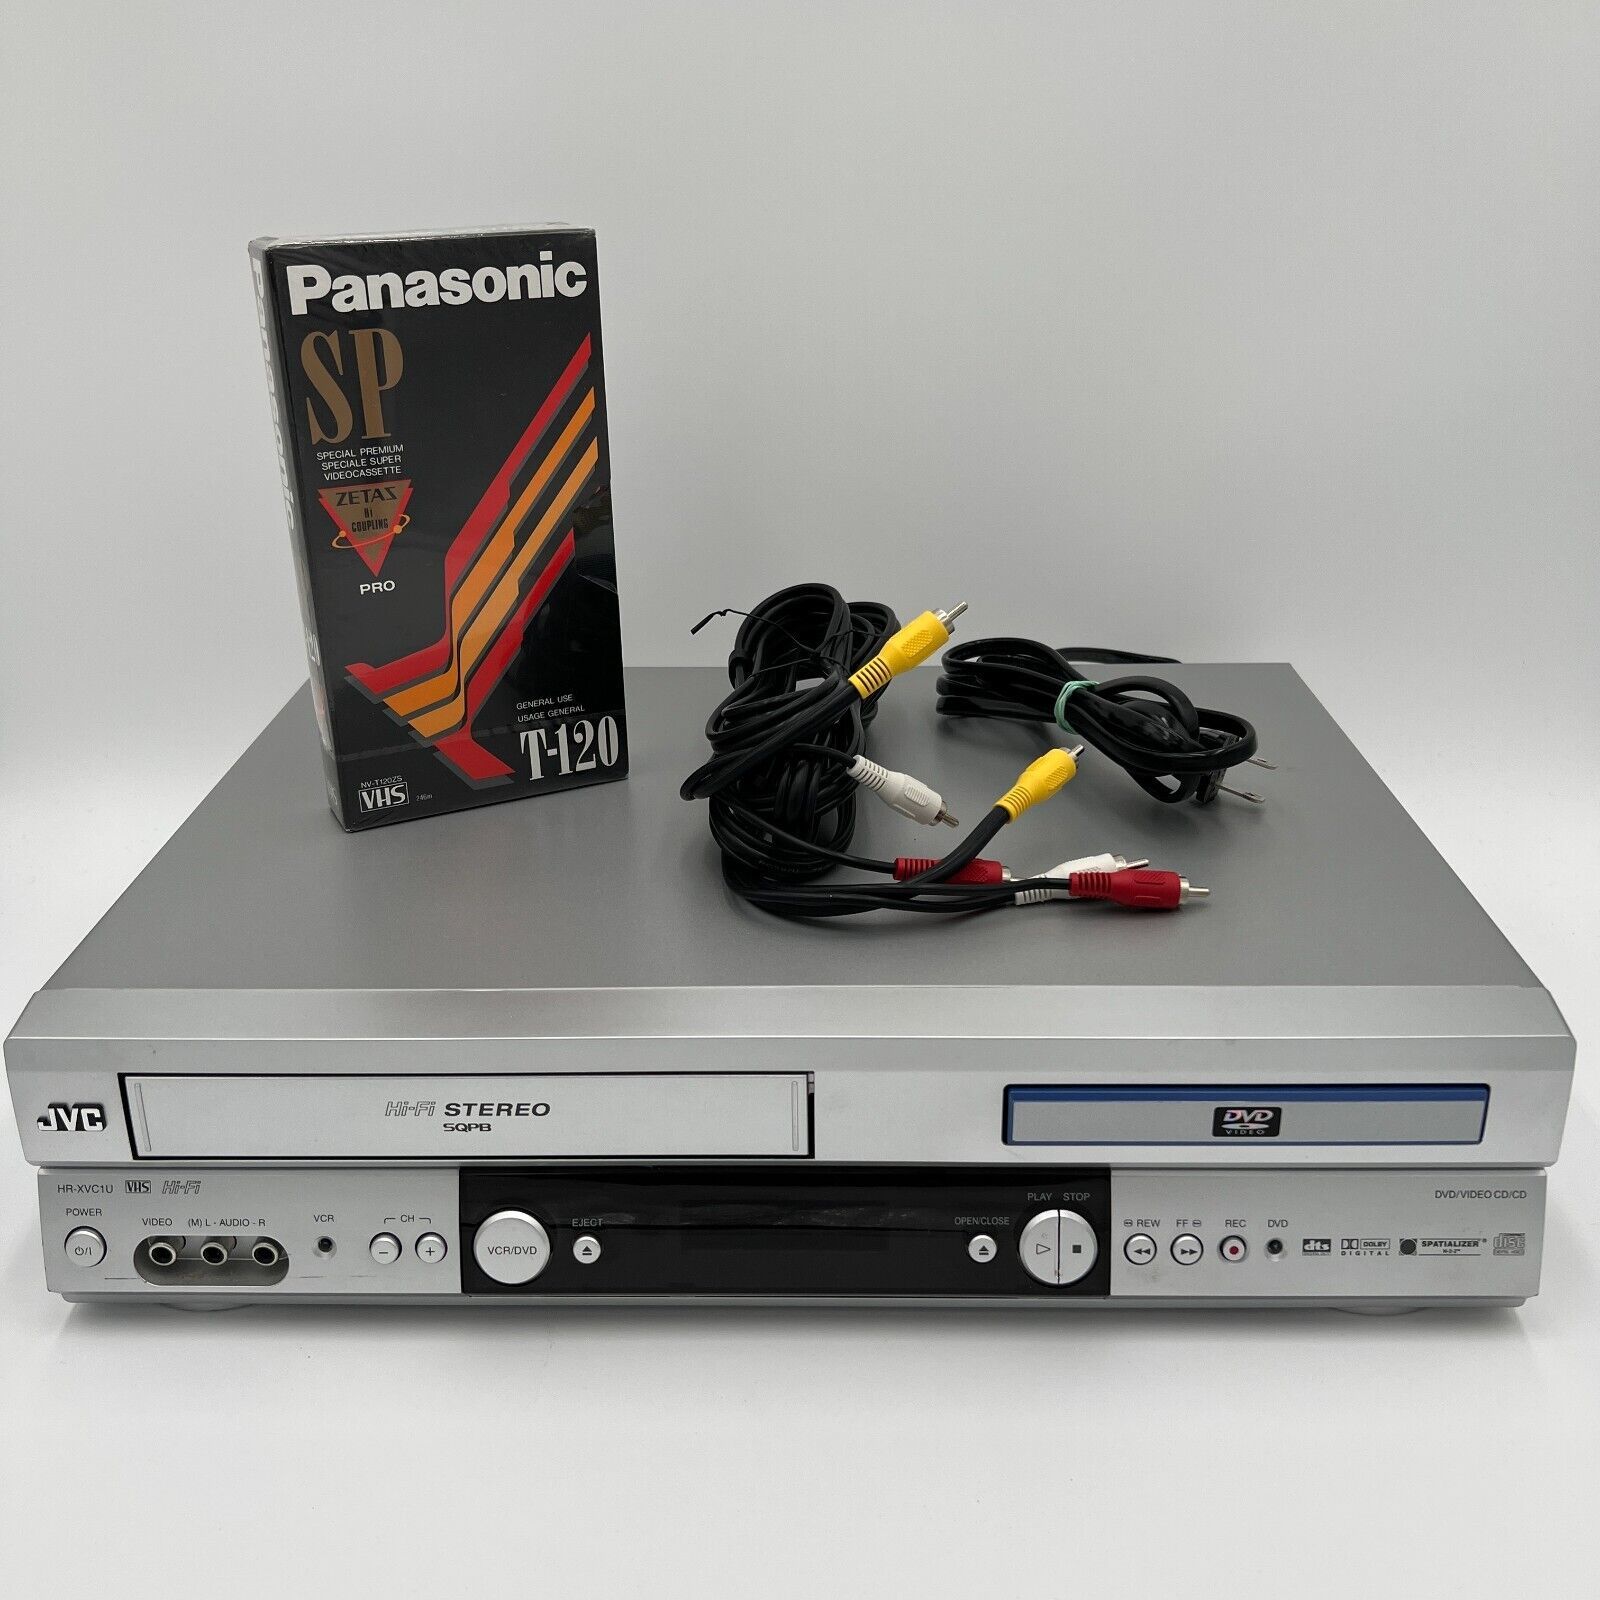 JVC HR-XVC1U DVD VCR Combo VHS Player, No Remote, A/V Cables & Blank Tape TESTED - $65.41